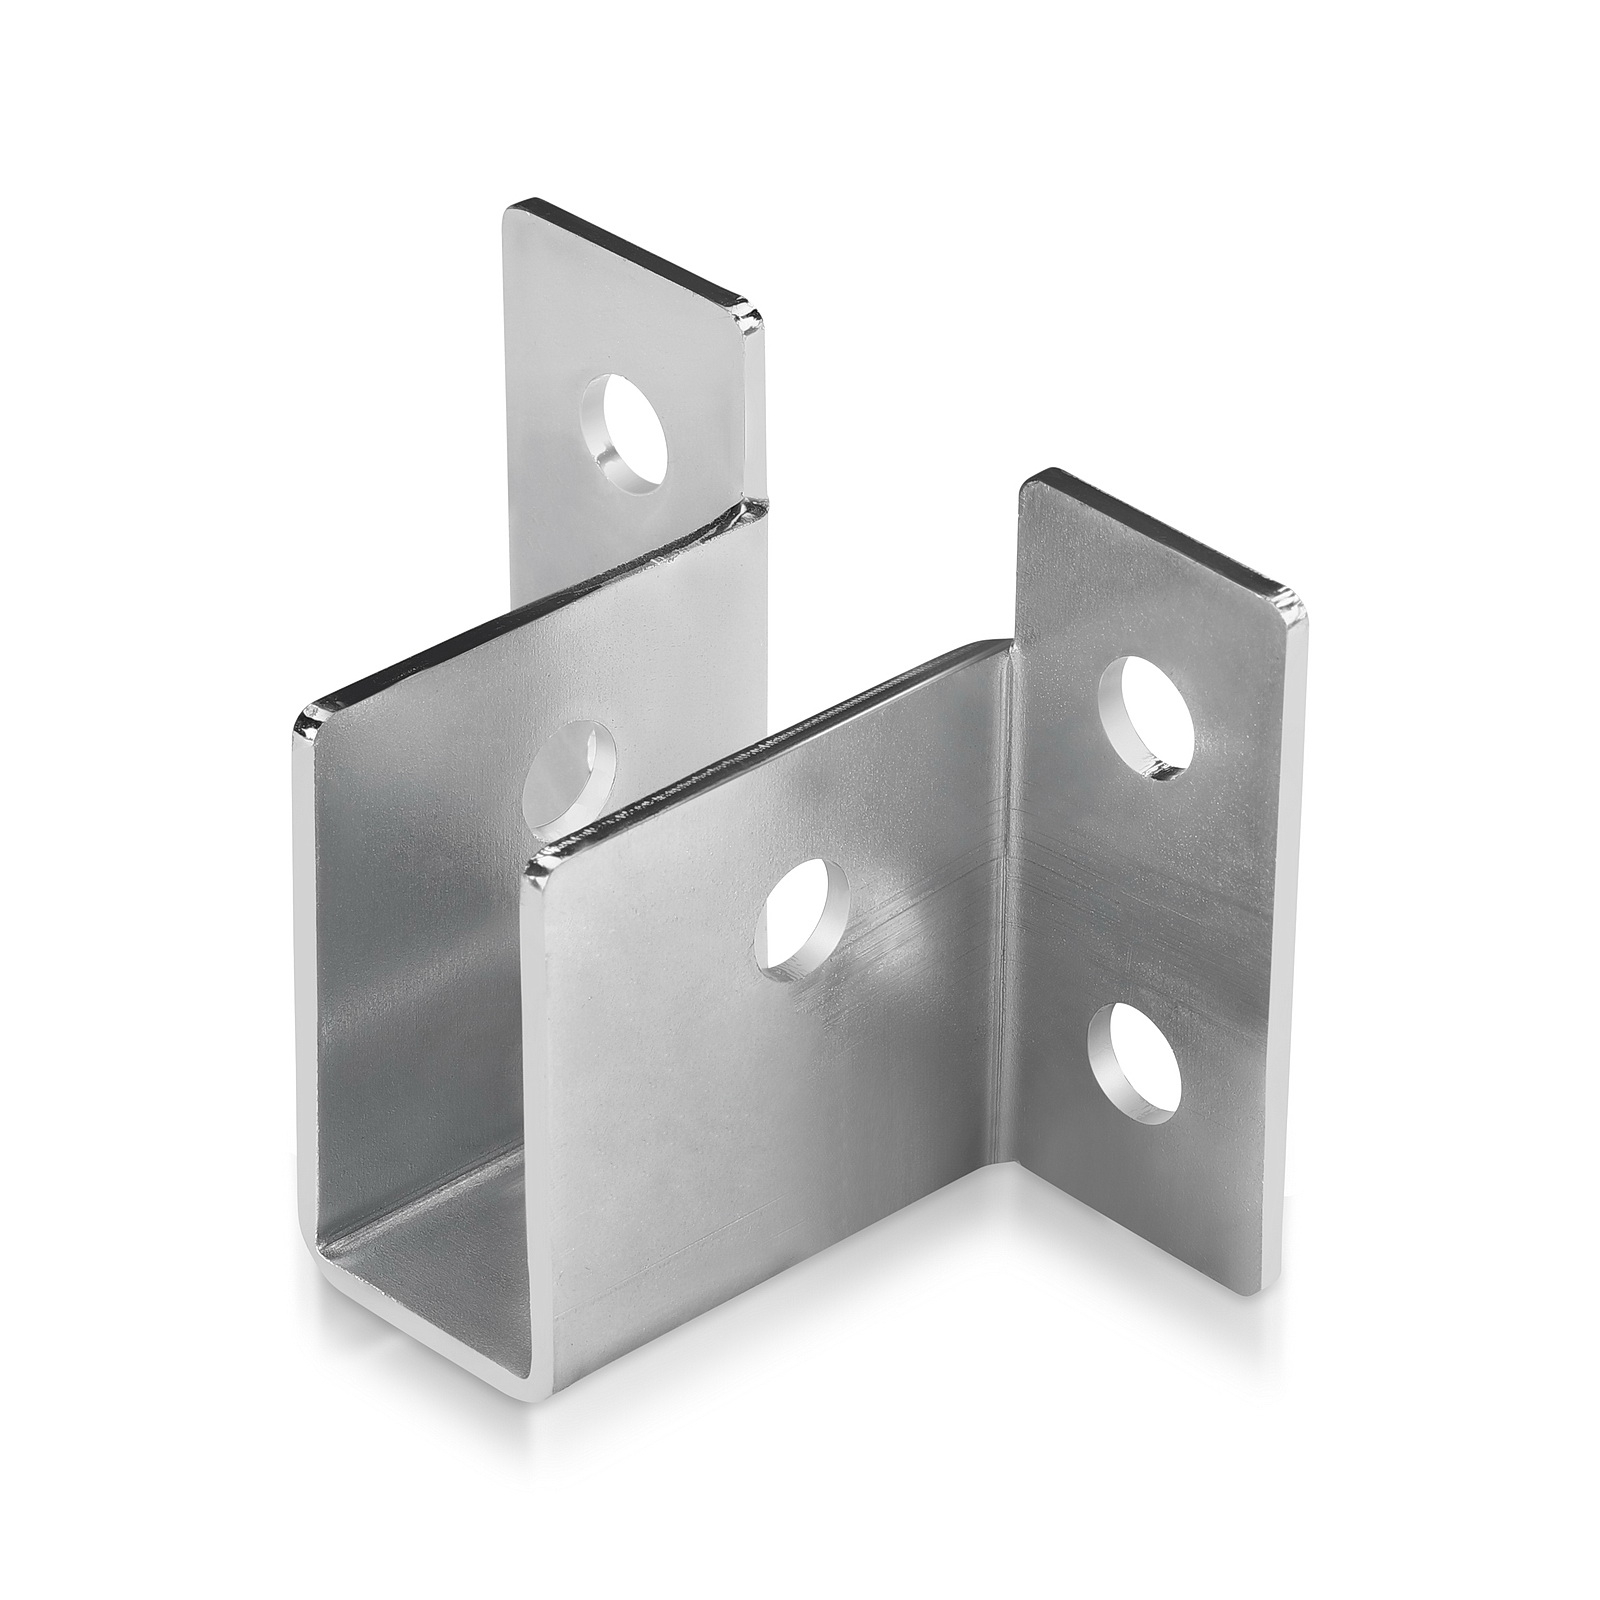 Sooper ''U'' Brackets for Solid Sign Substrate Mounting - for 3/4'' Material Corners - Steel Zinc Coated (1 ea.)